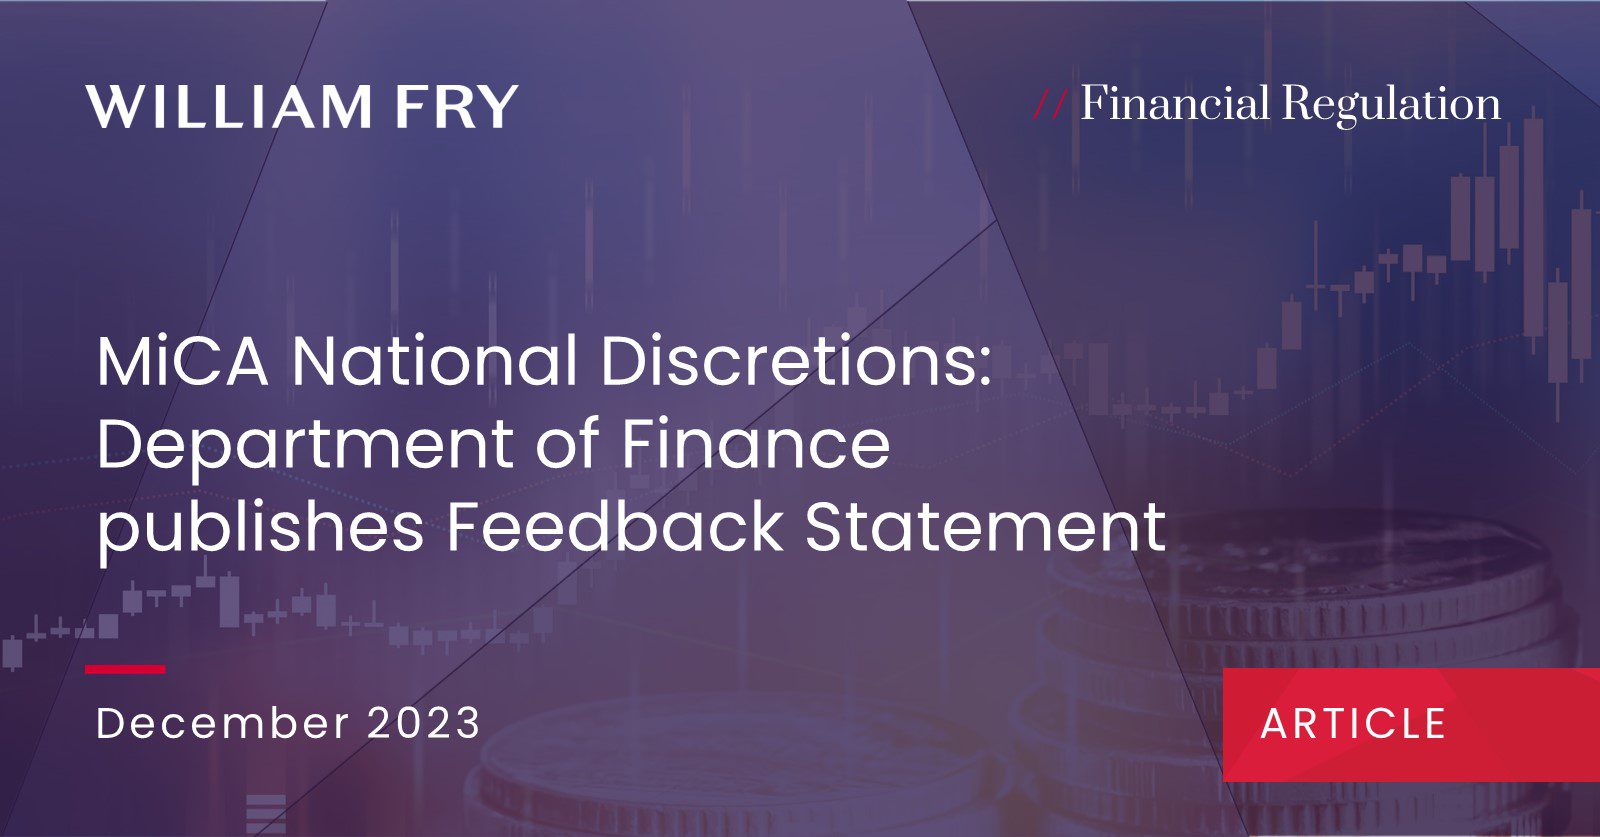 MiCA National Discretions: Department of Finance publishes Feedback Statement